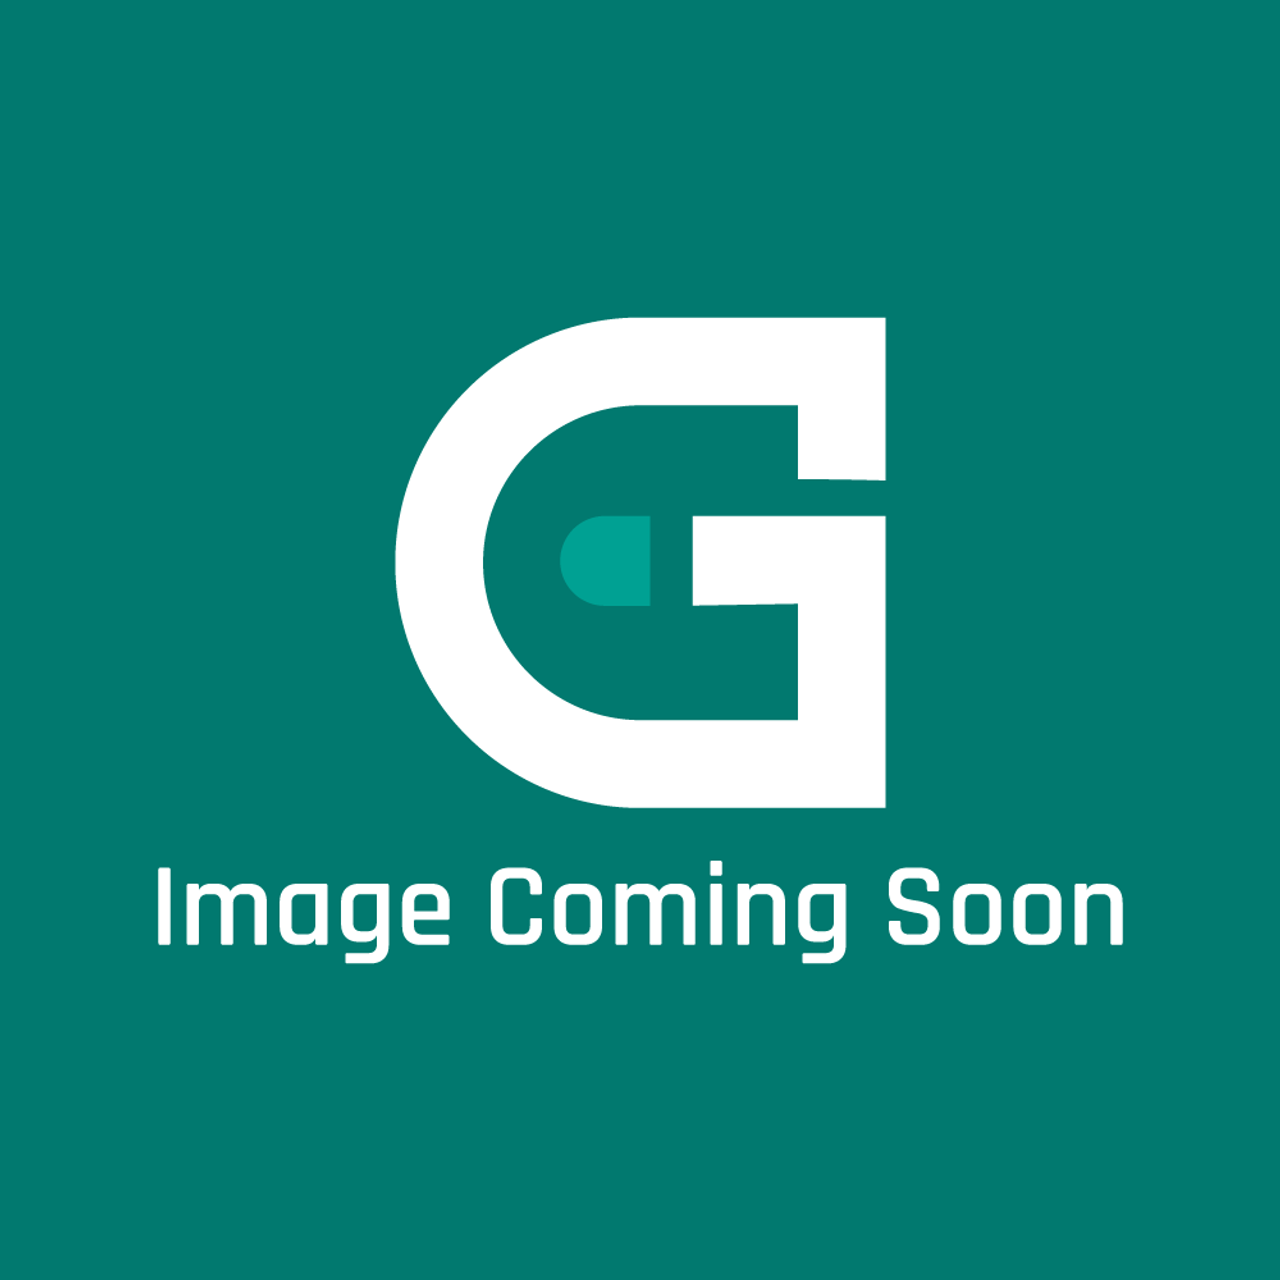 GE Appliances WR14X10167 - Gasket Motor Cover - Image Coming Soon!